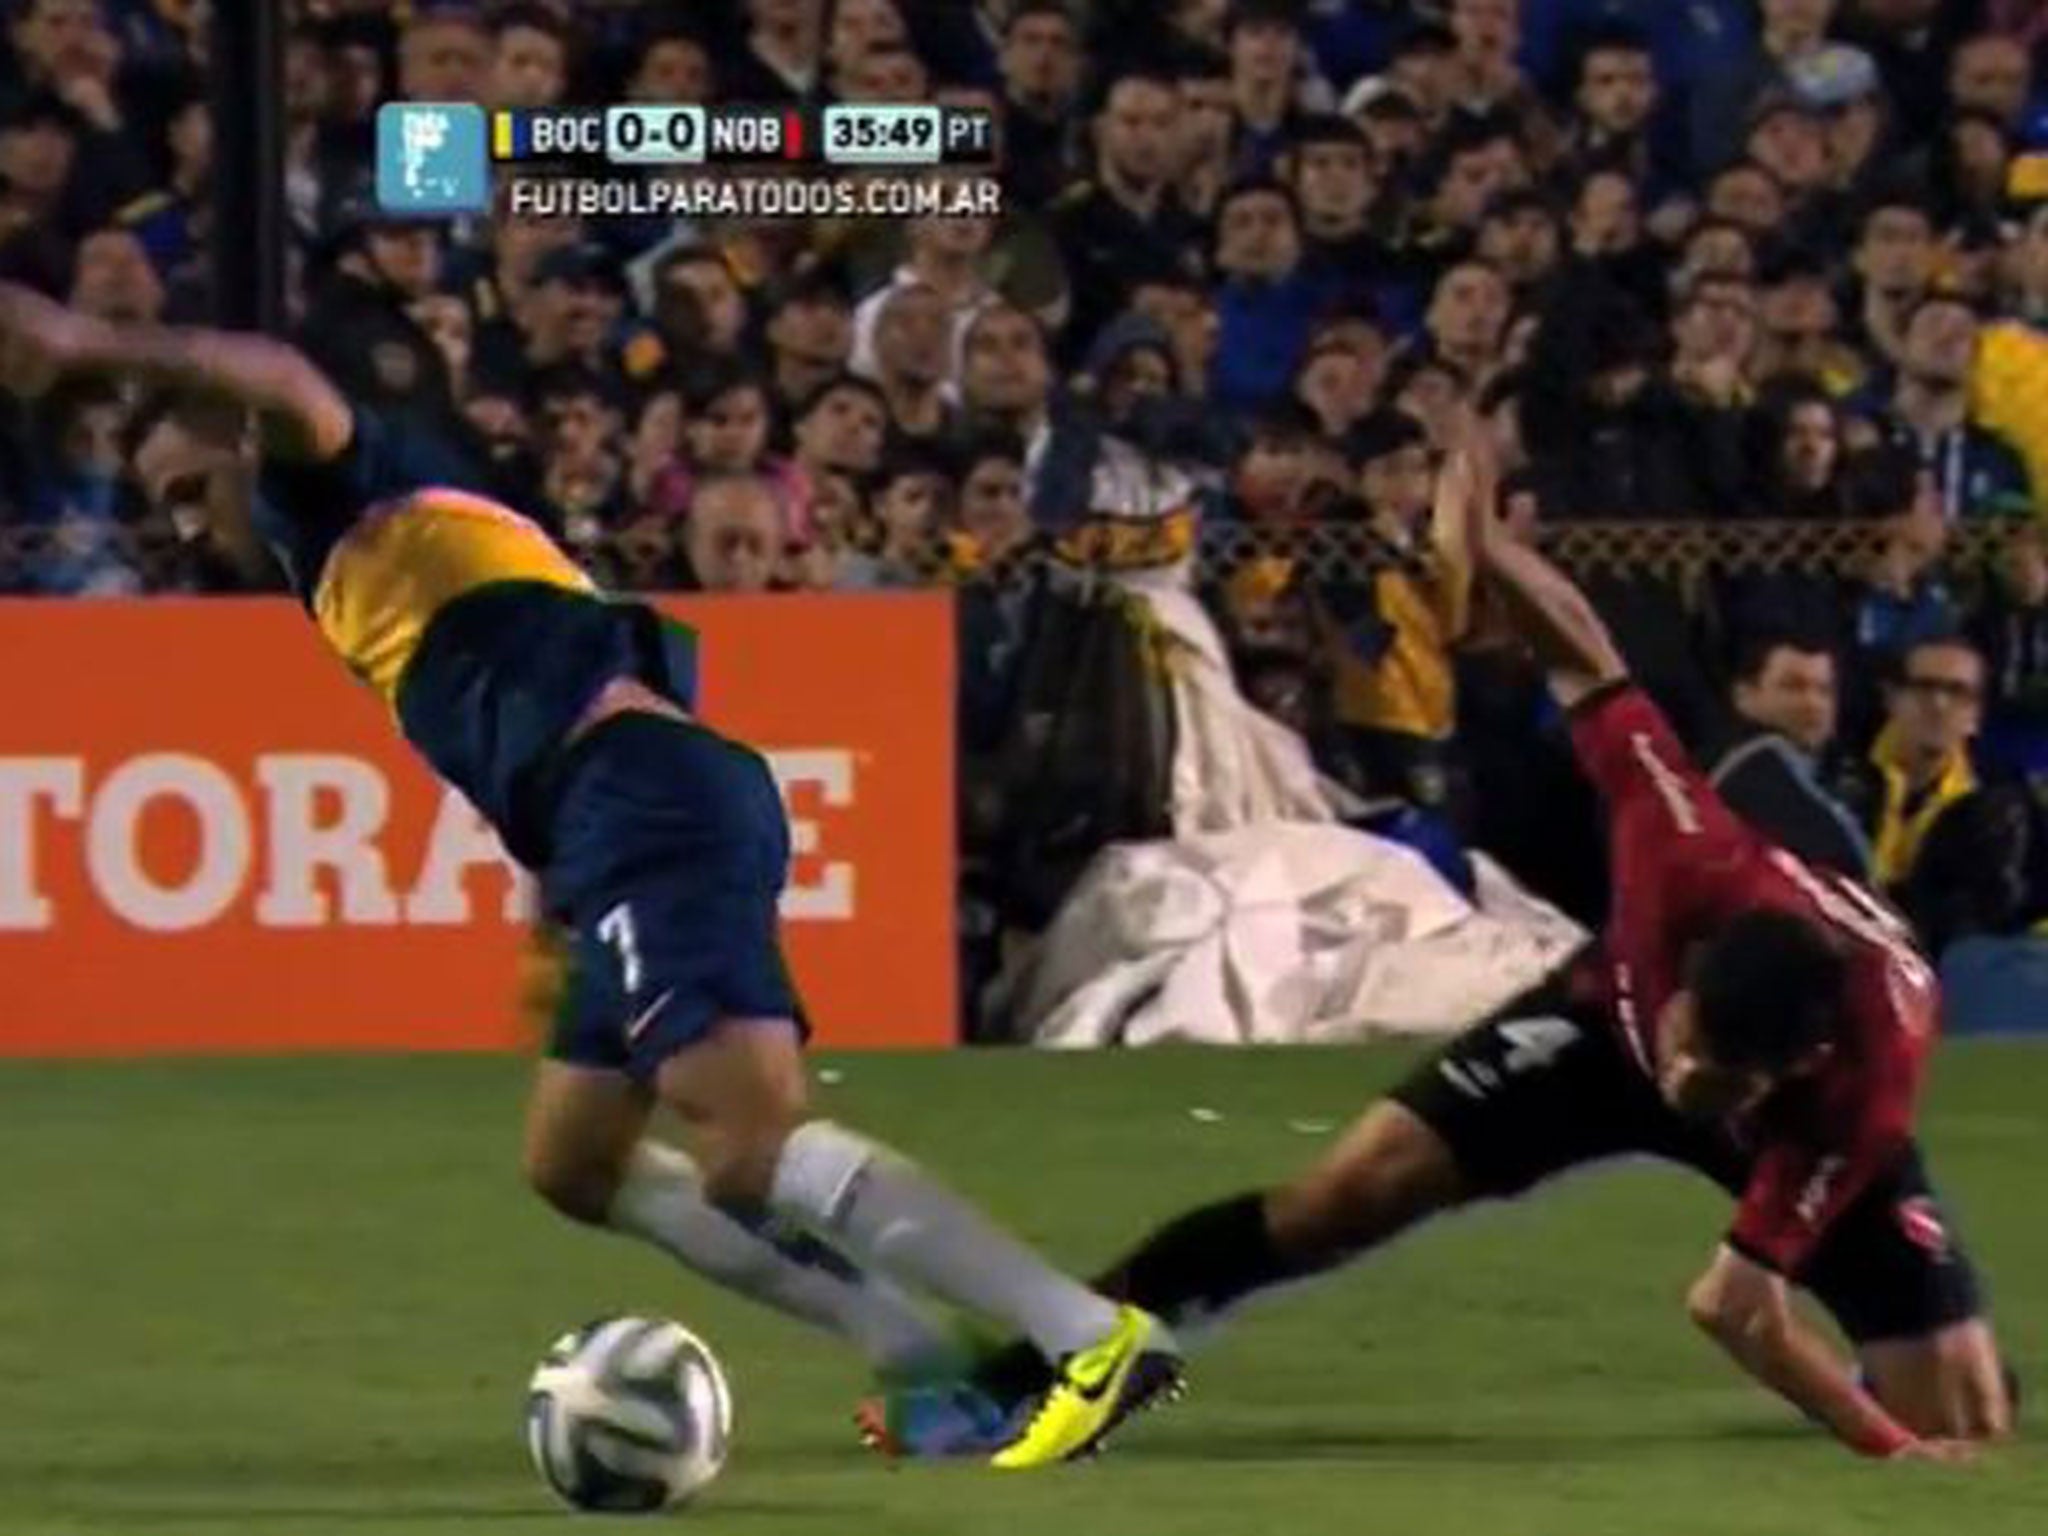 Newell's Old Boys defender Martin Caceres dislocated his arm against Boca Juniors